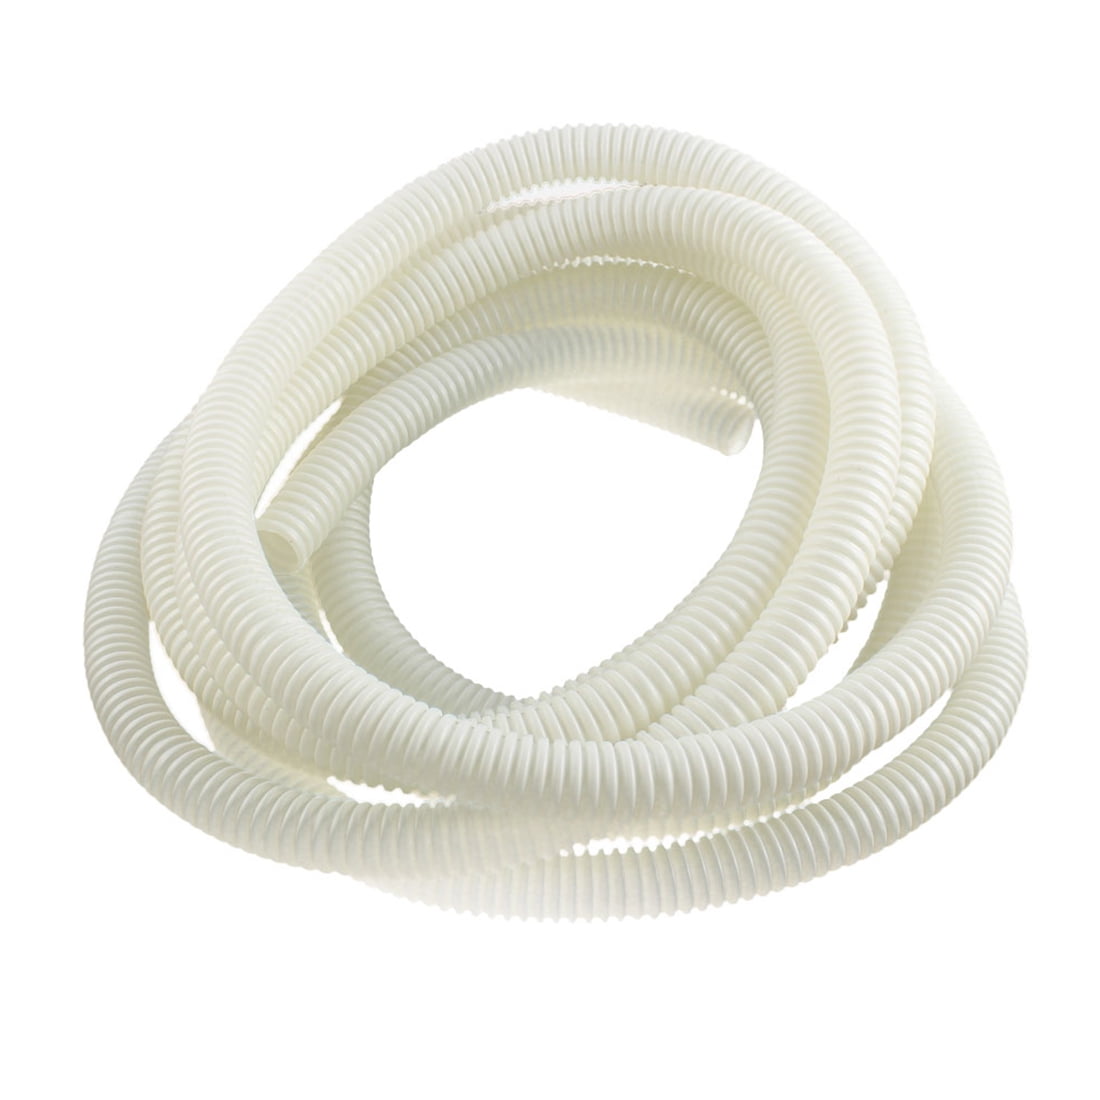 Plastic Air Conditioner Drain Pipe Water Hose 4.8 Meters Length White